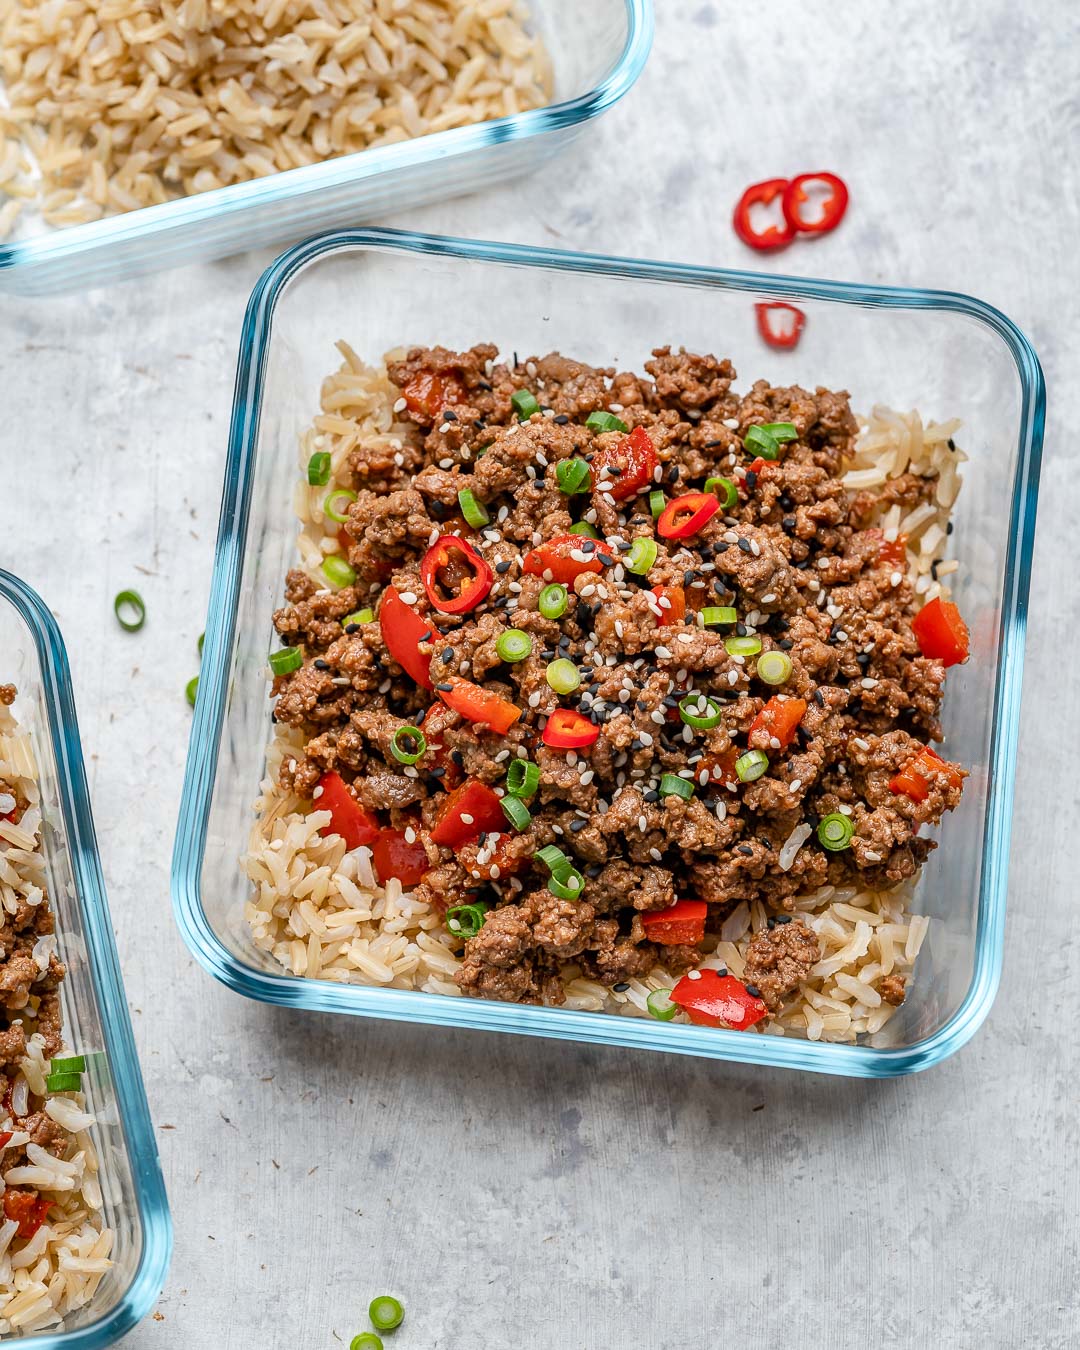 https://cleanfoodcrush.com/wp-content/uploads/2020/03/CleanFoodCrush-Asian-Style-Beef-Meal-Prep-Bowls-.jpg